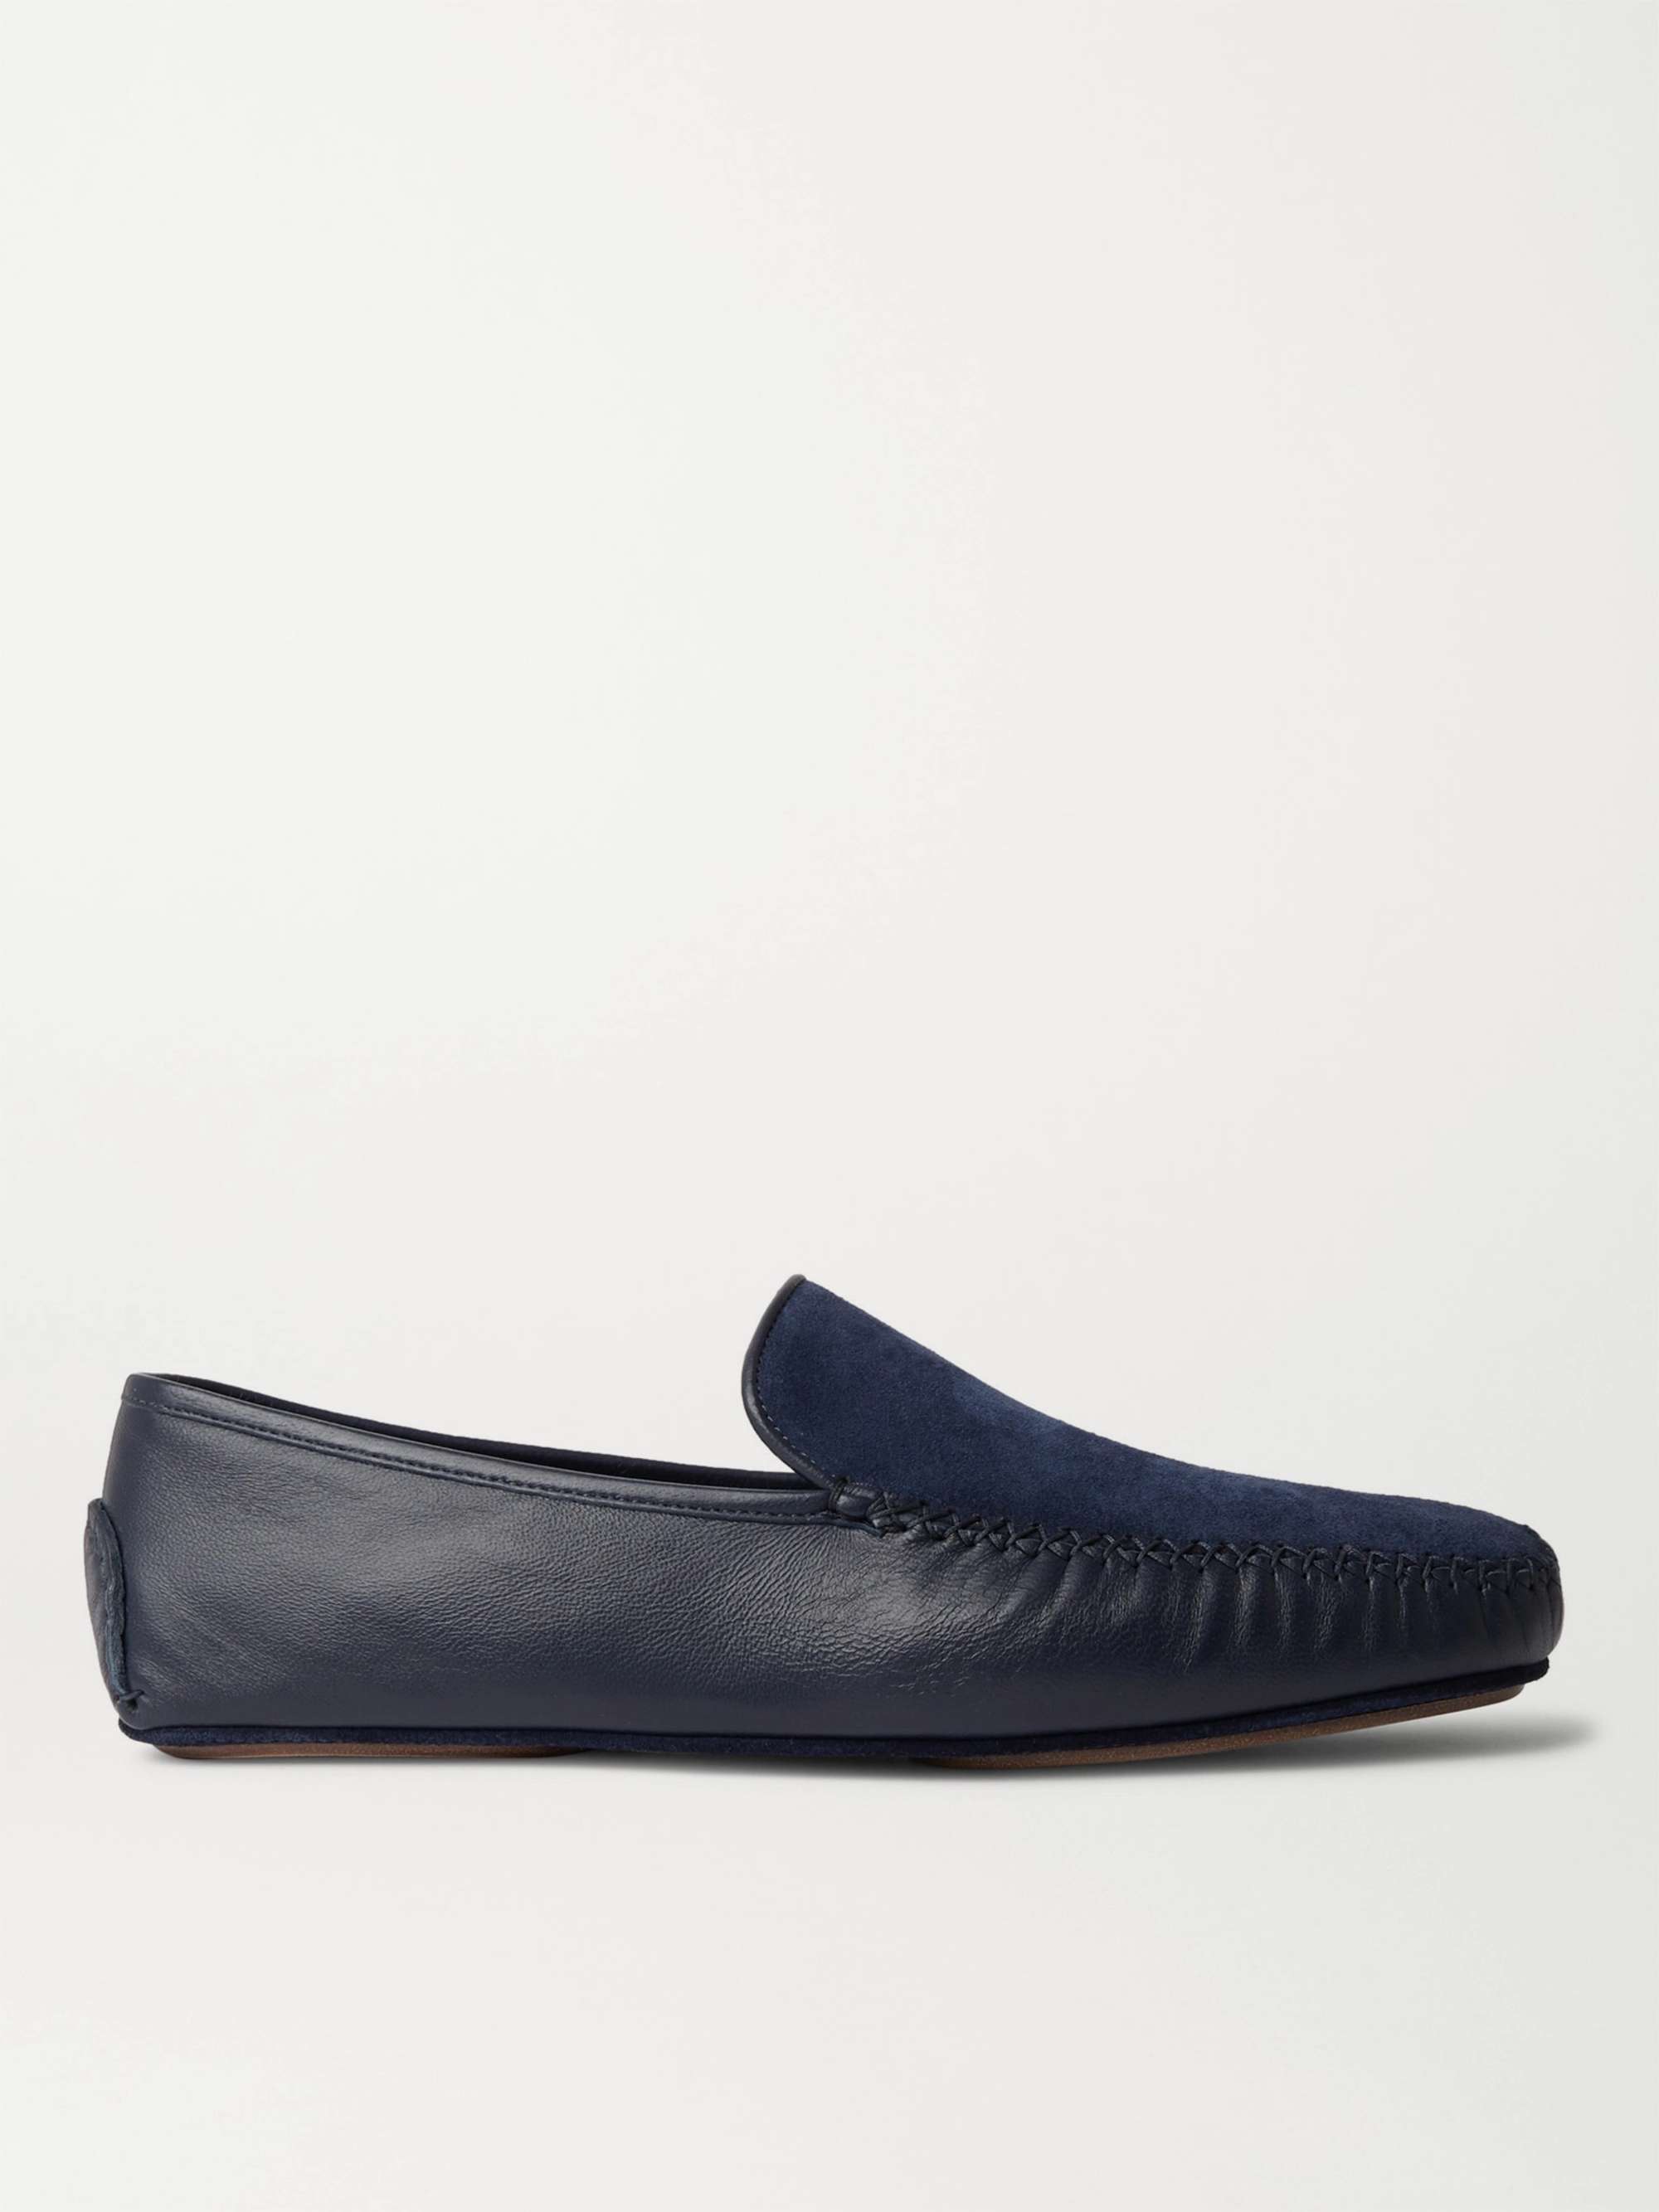 MANOLO BLAHNIK Mayfair Leather and Suede Slippers